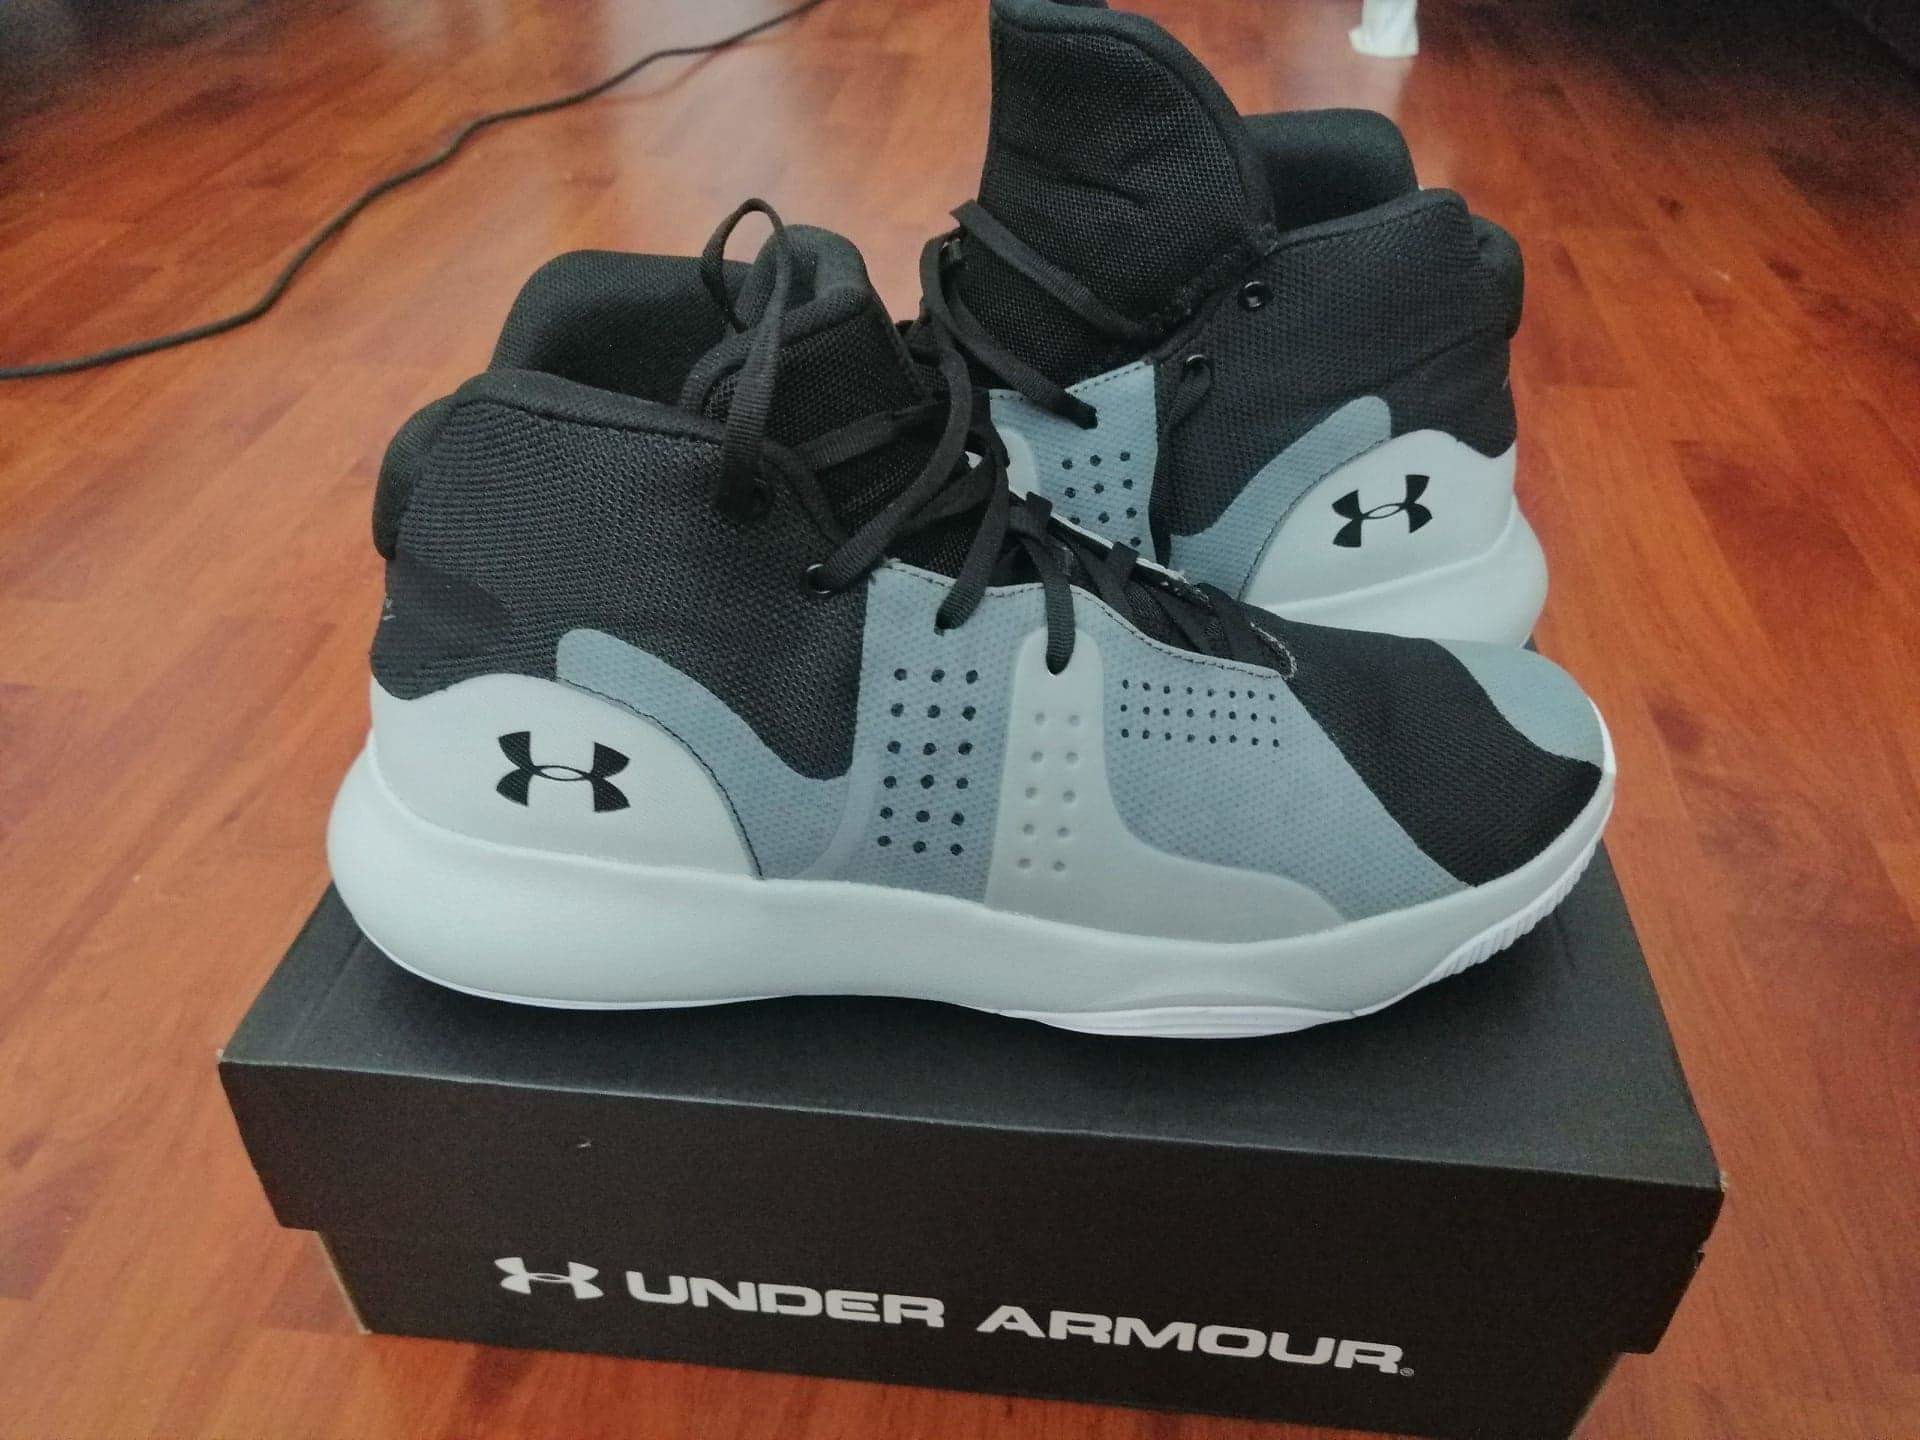 men's ua anomaly basketball shoes review